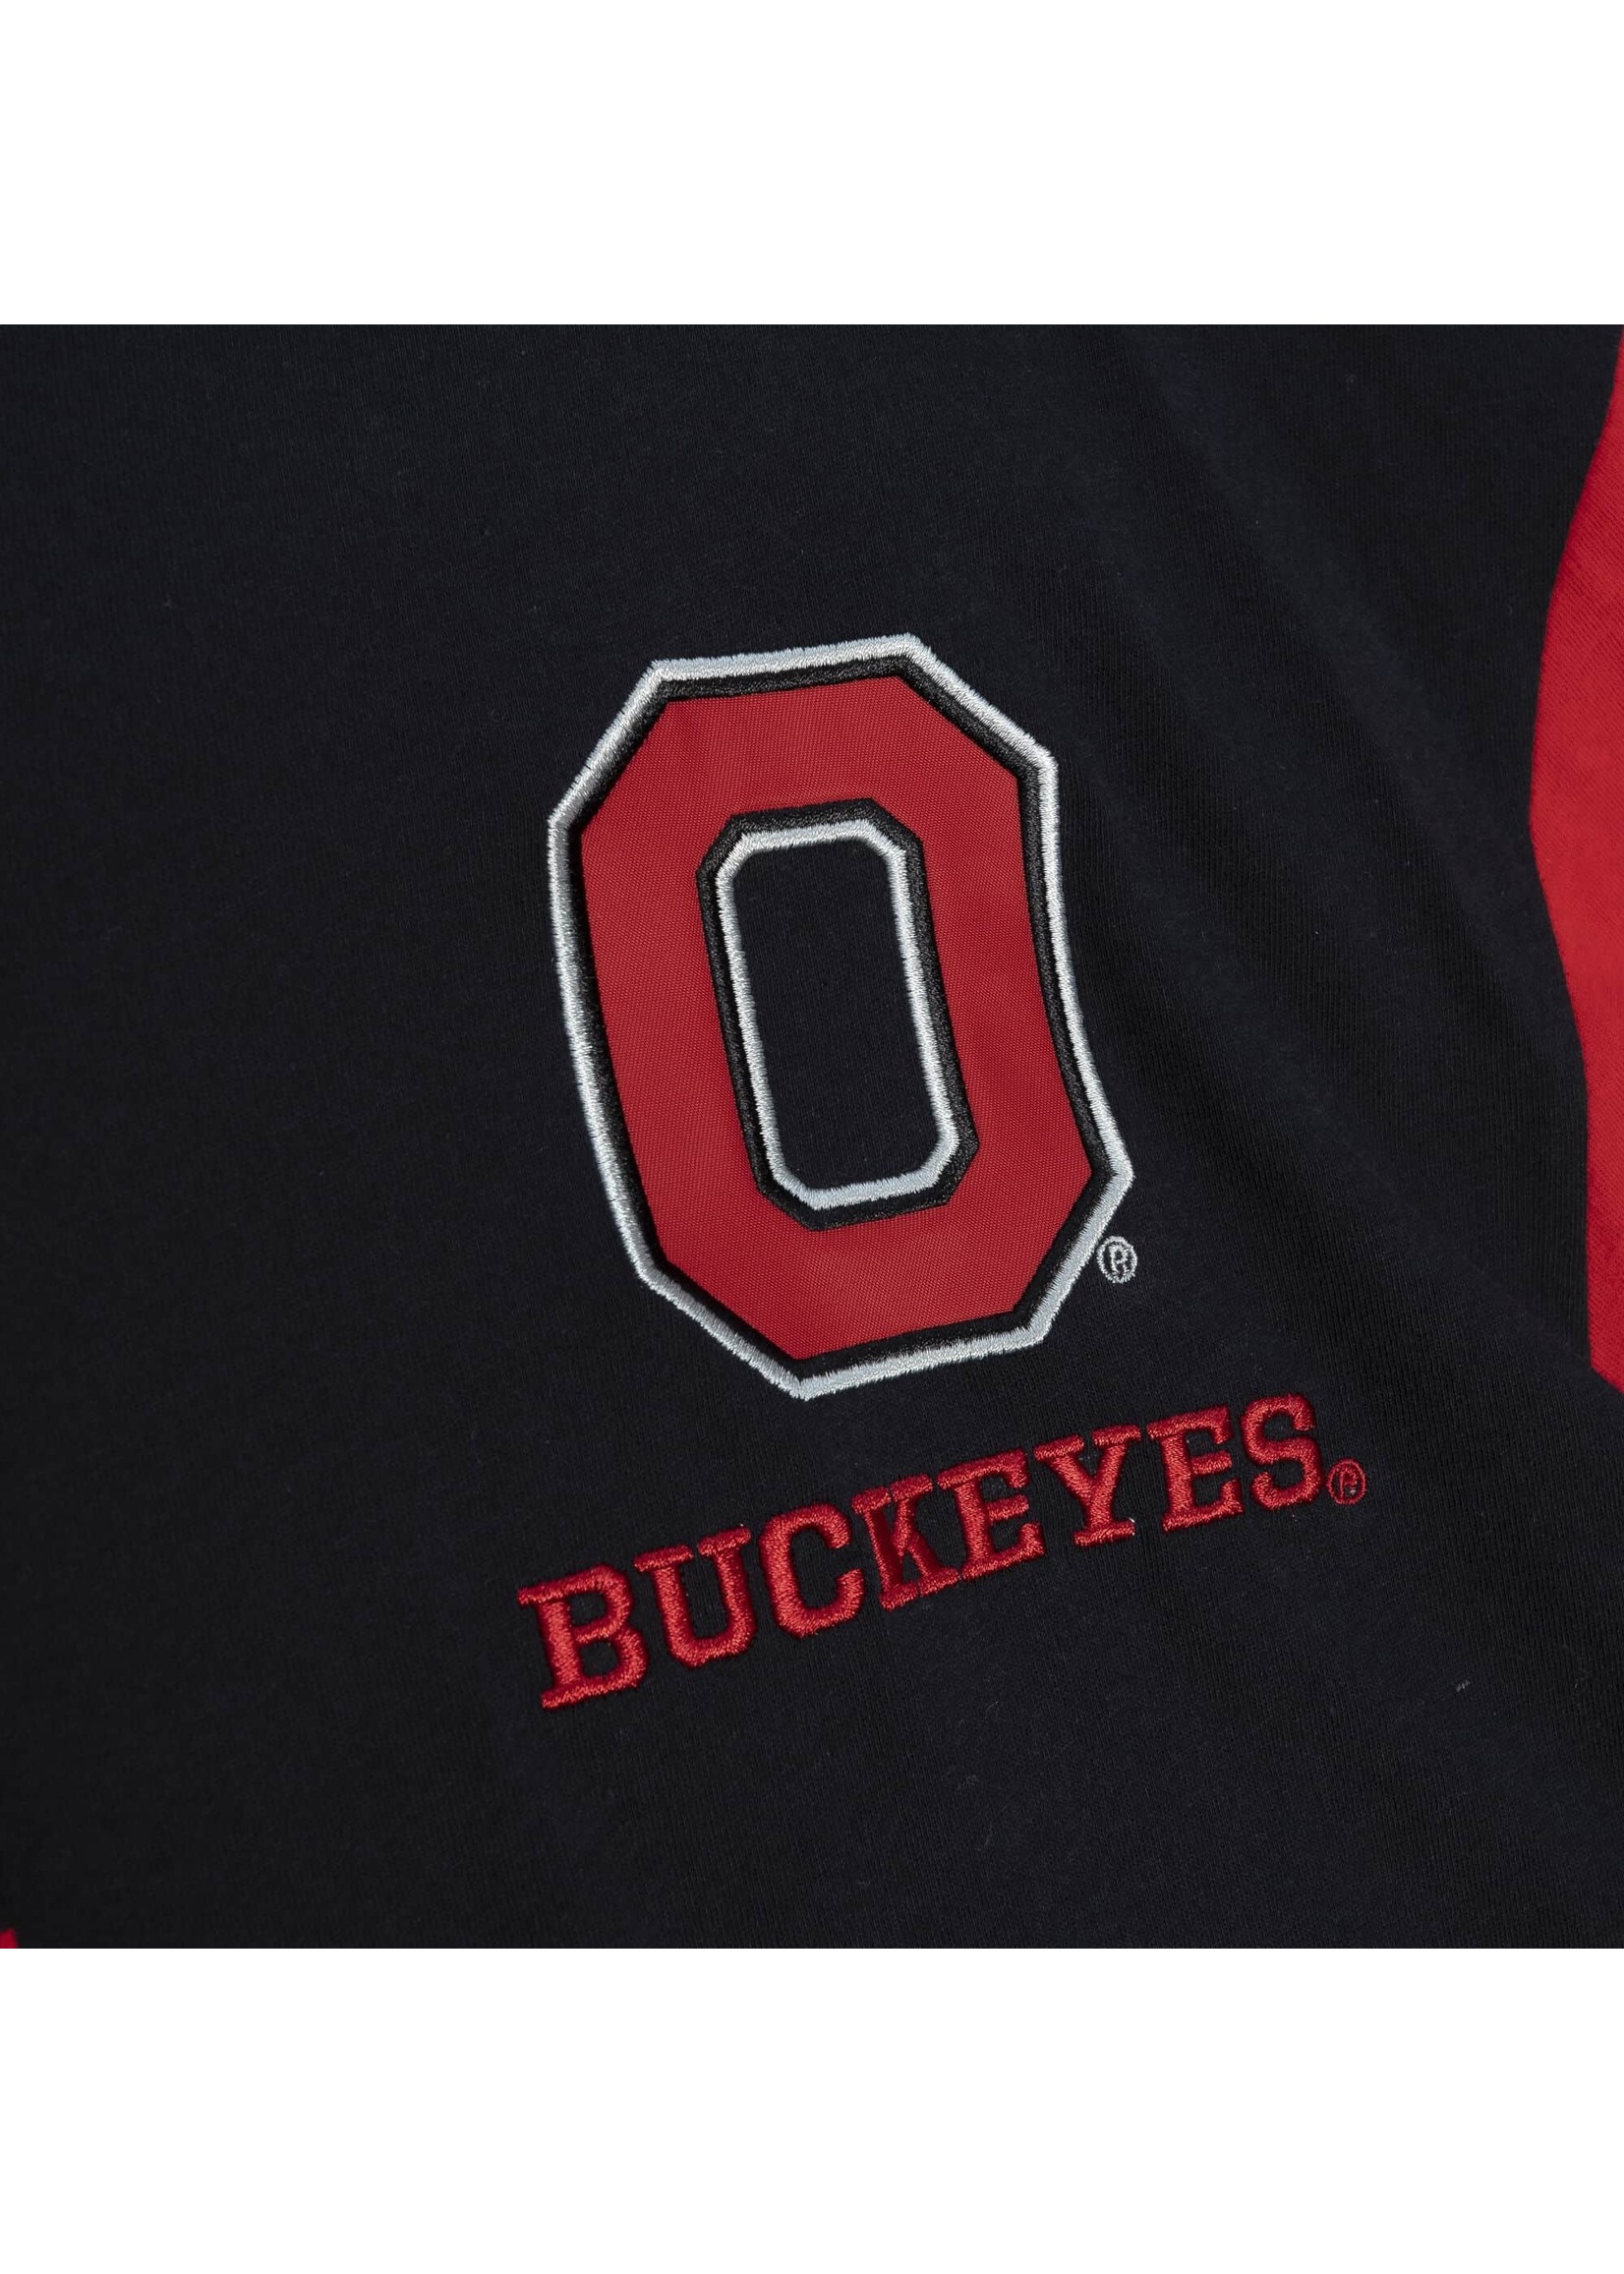 MITCHELL & NESS Ohio State Buckeyes Play by Play 2.0 Tee